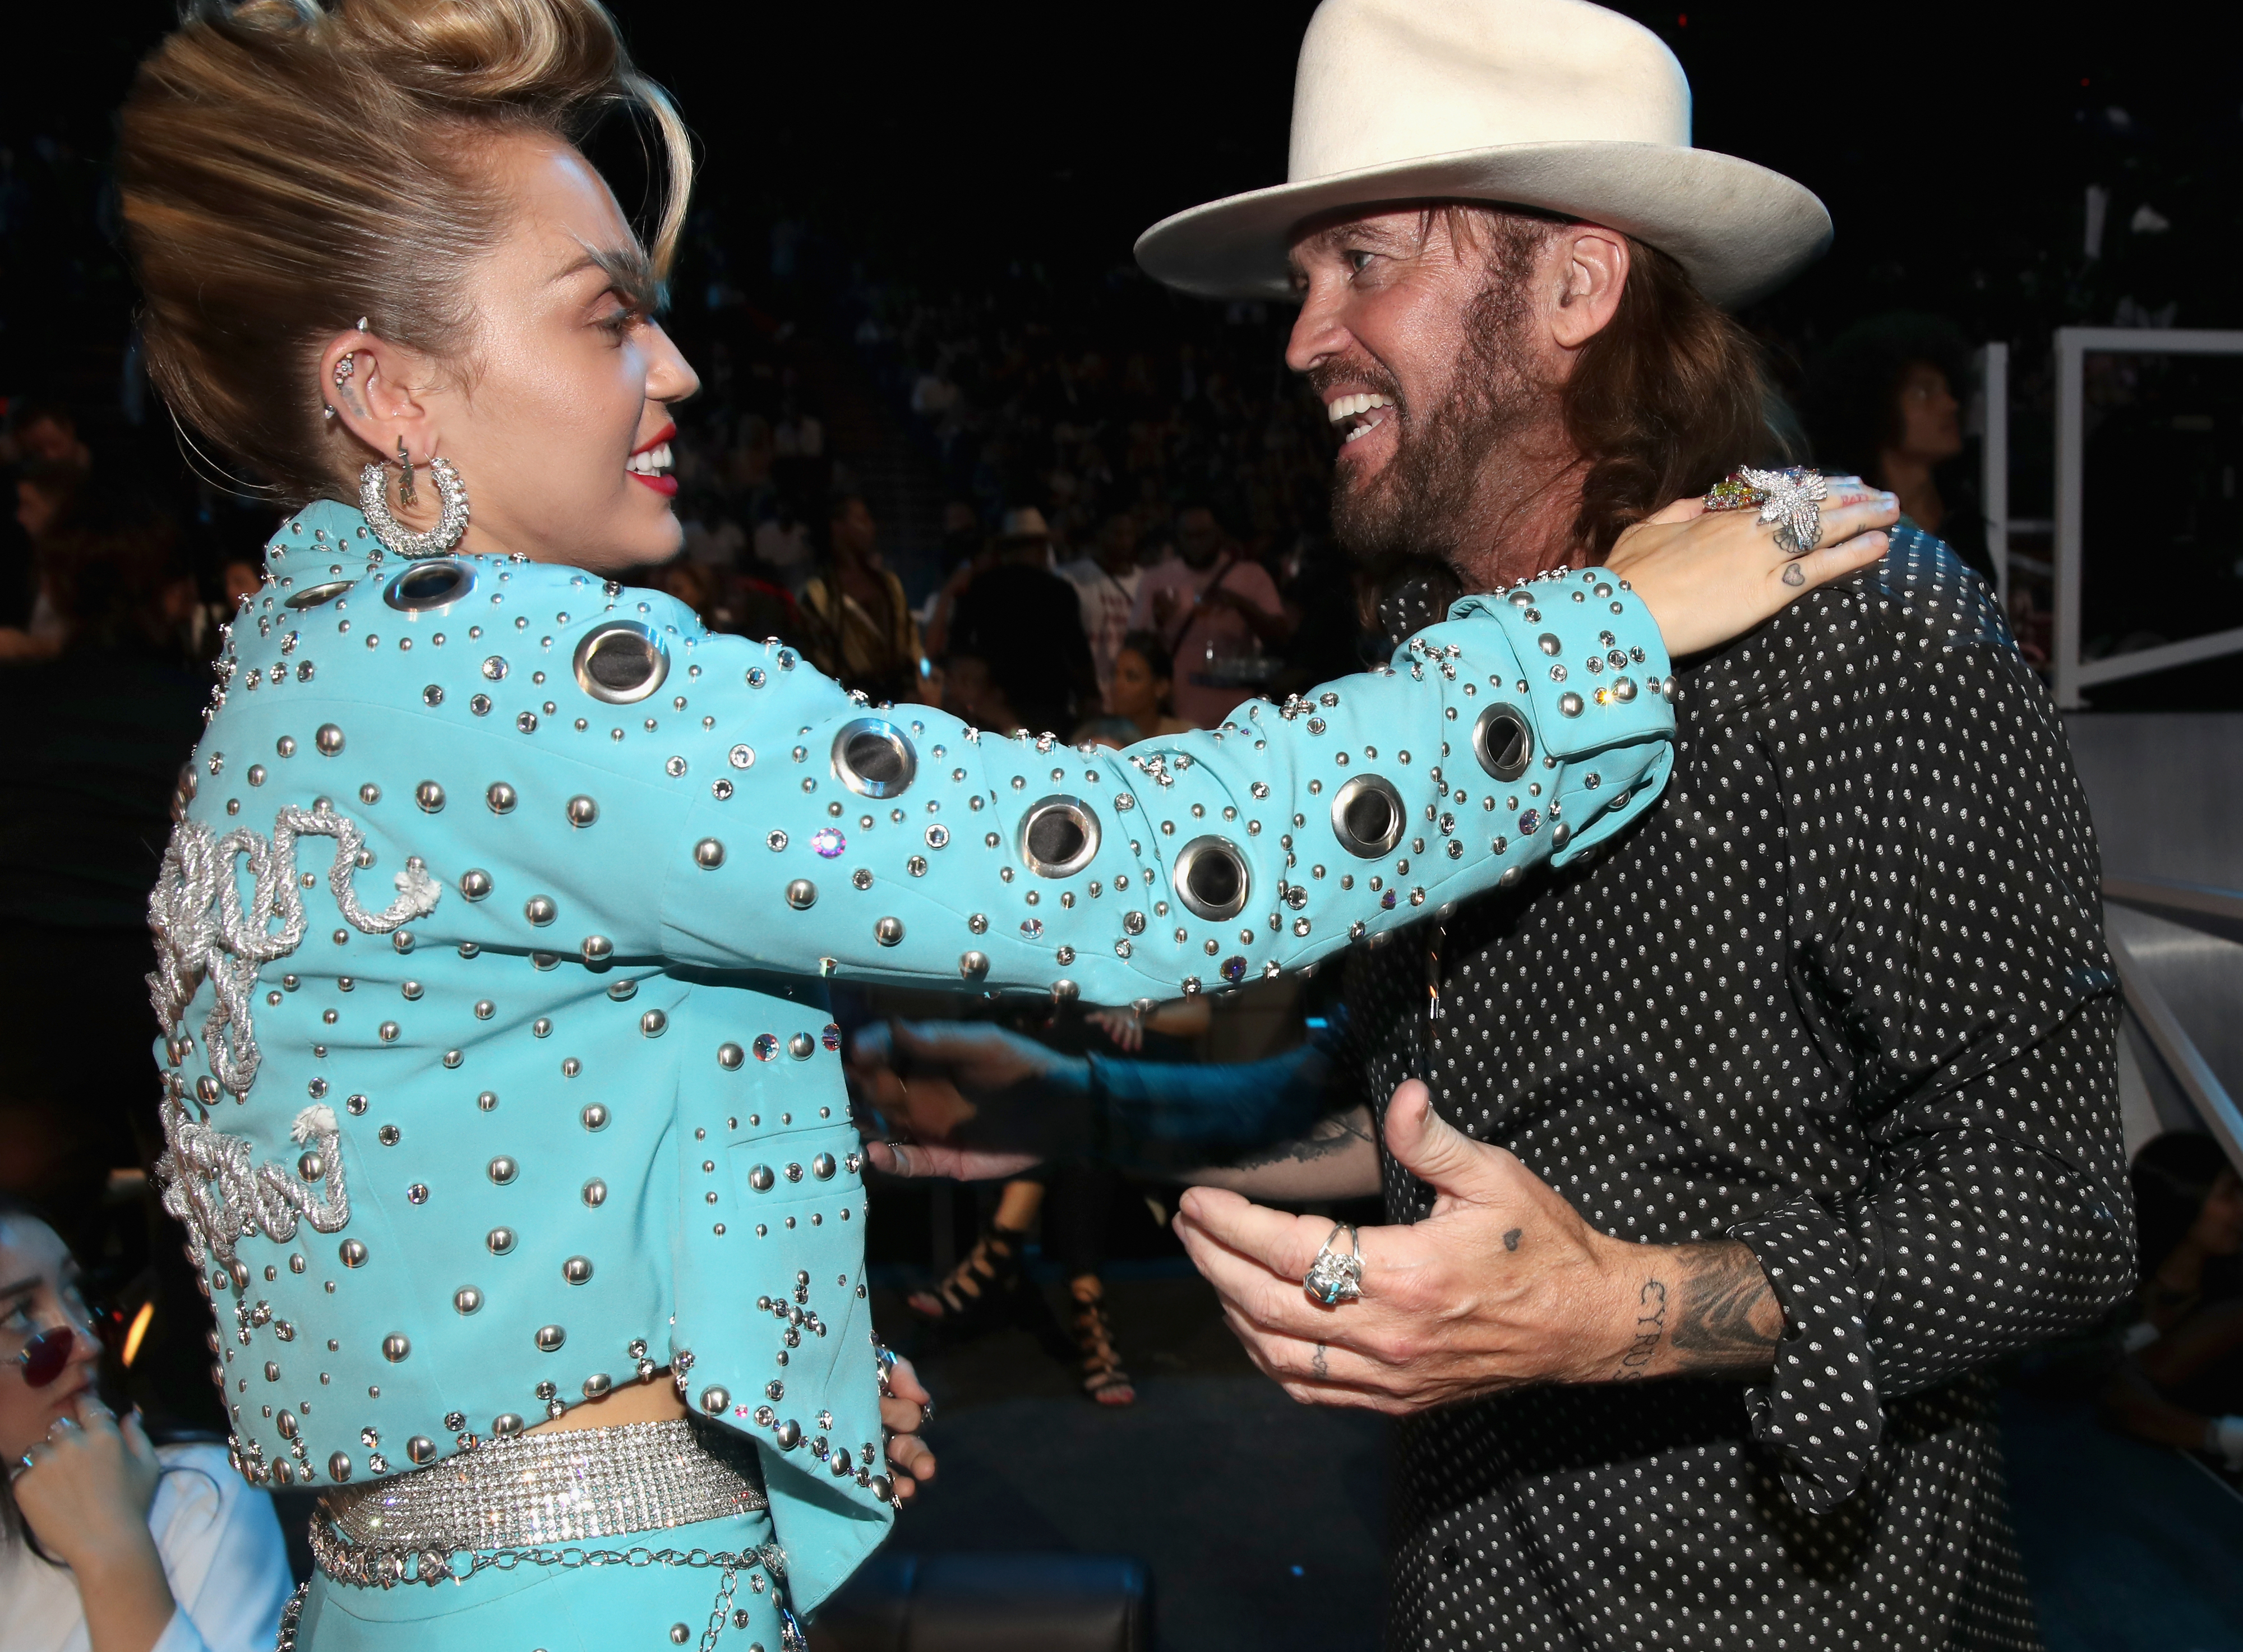 Miley Cyrus in embellished blue jacket hugging Billy Ray Cyrus in a hat and polka-dot shirt at event